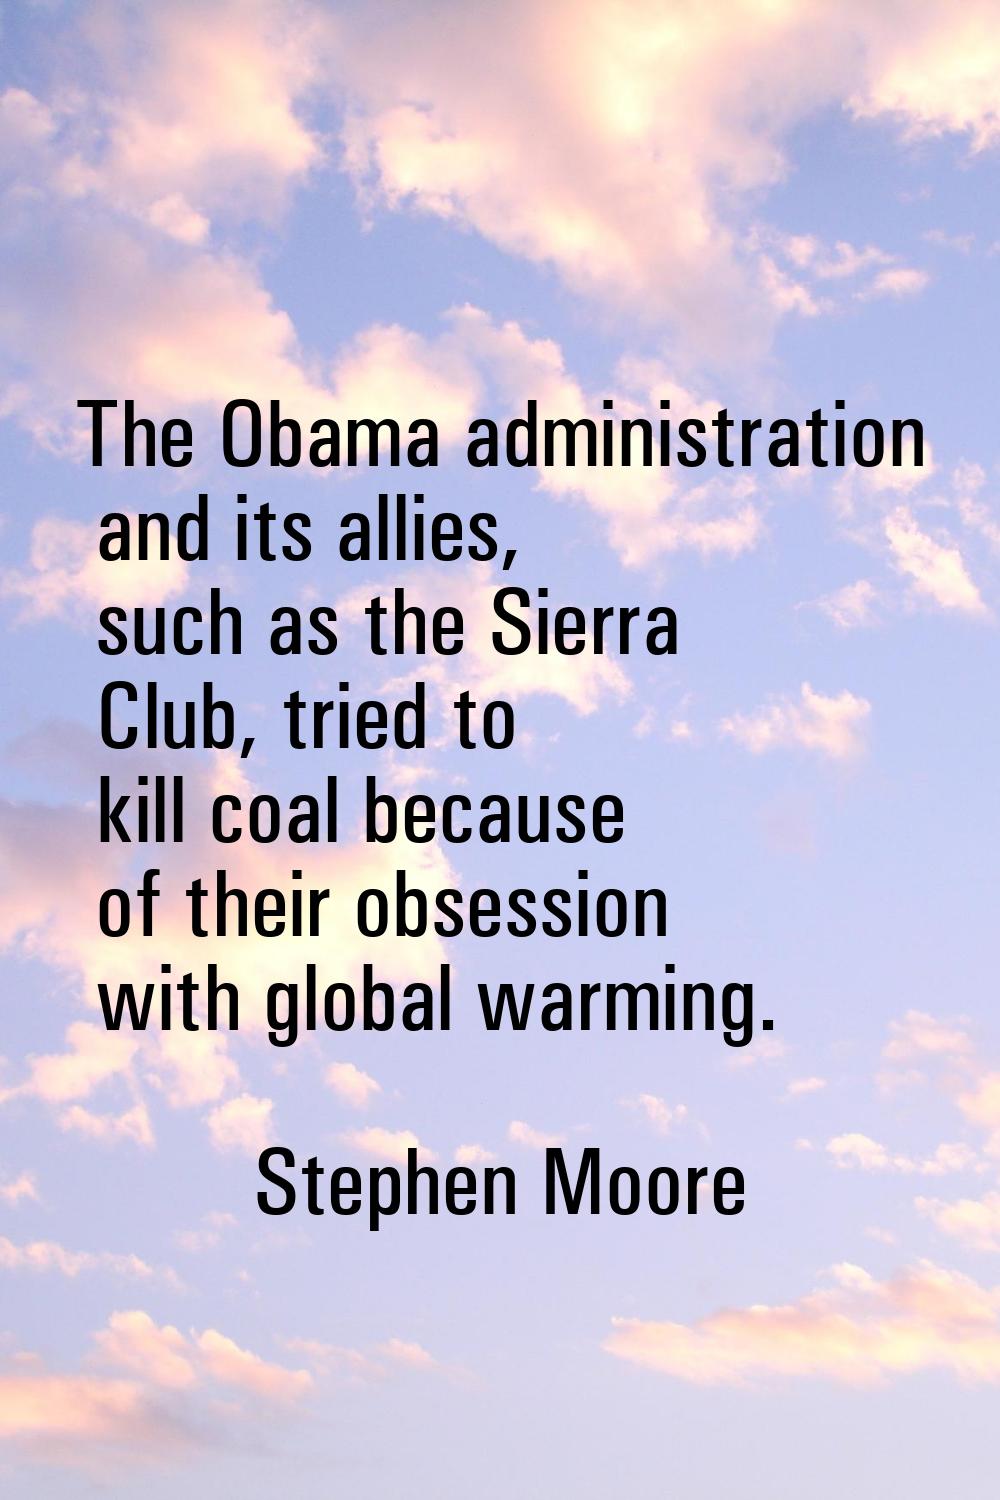 The Obama administration and its allies, such as the Sierra Club, tried to kill coal because of the